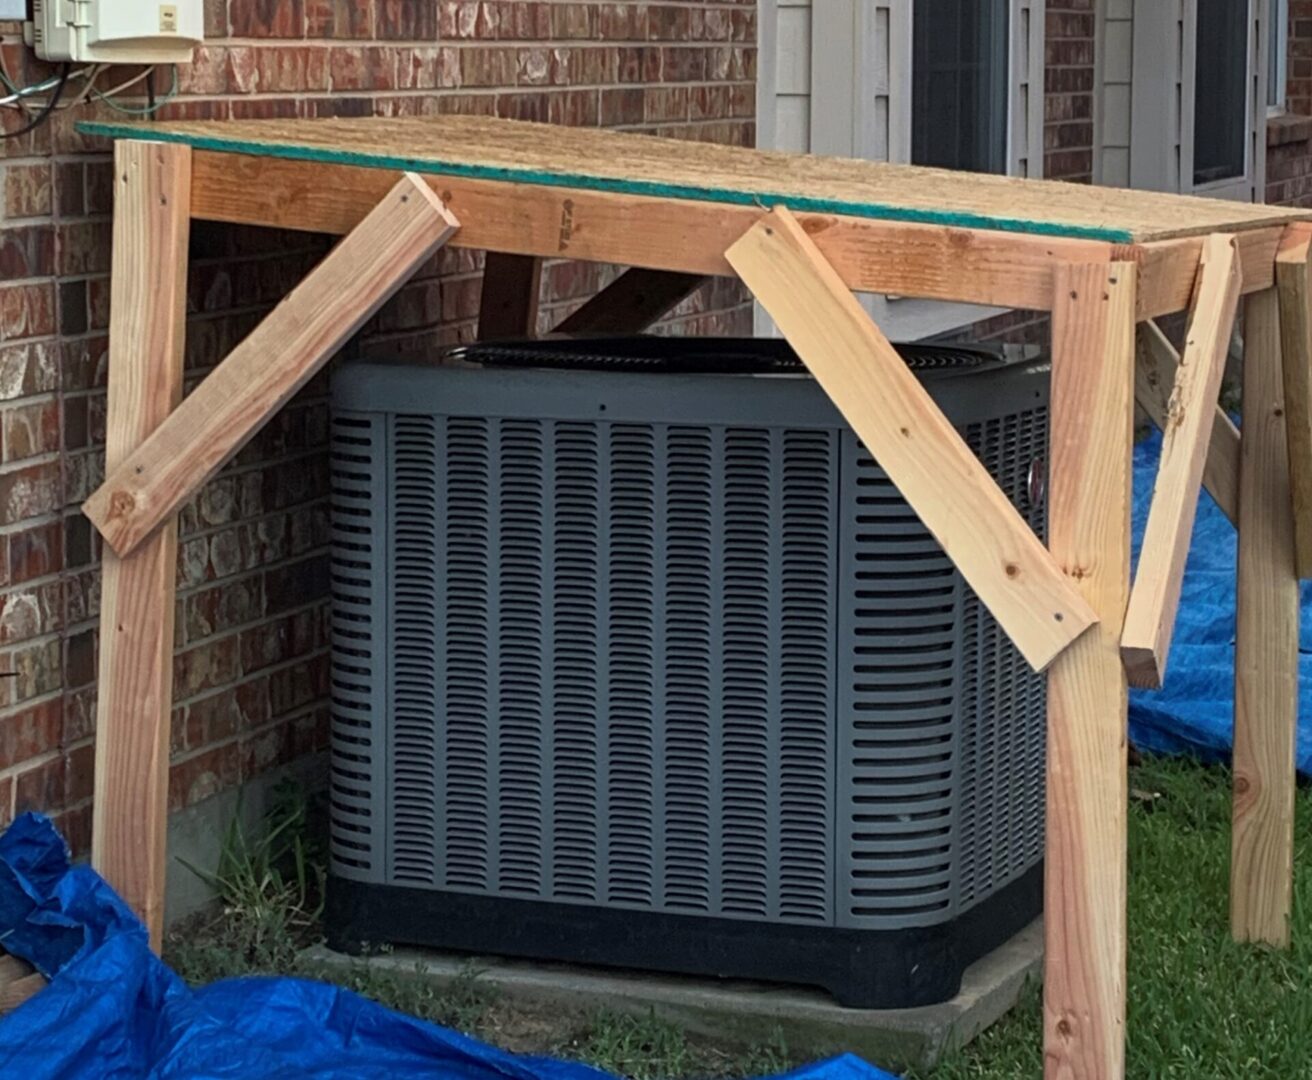 A large air conditioner under construction in the yard.